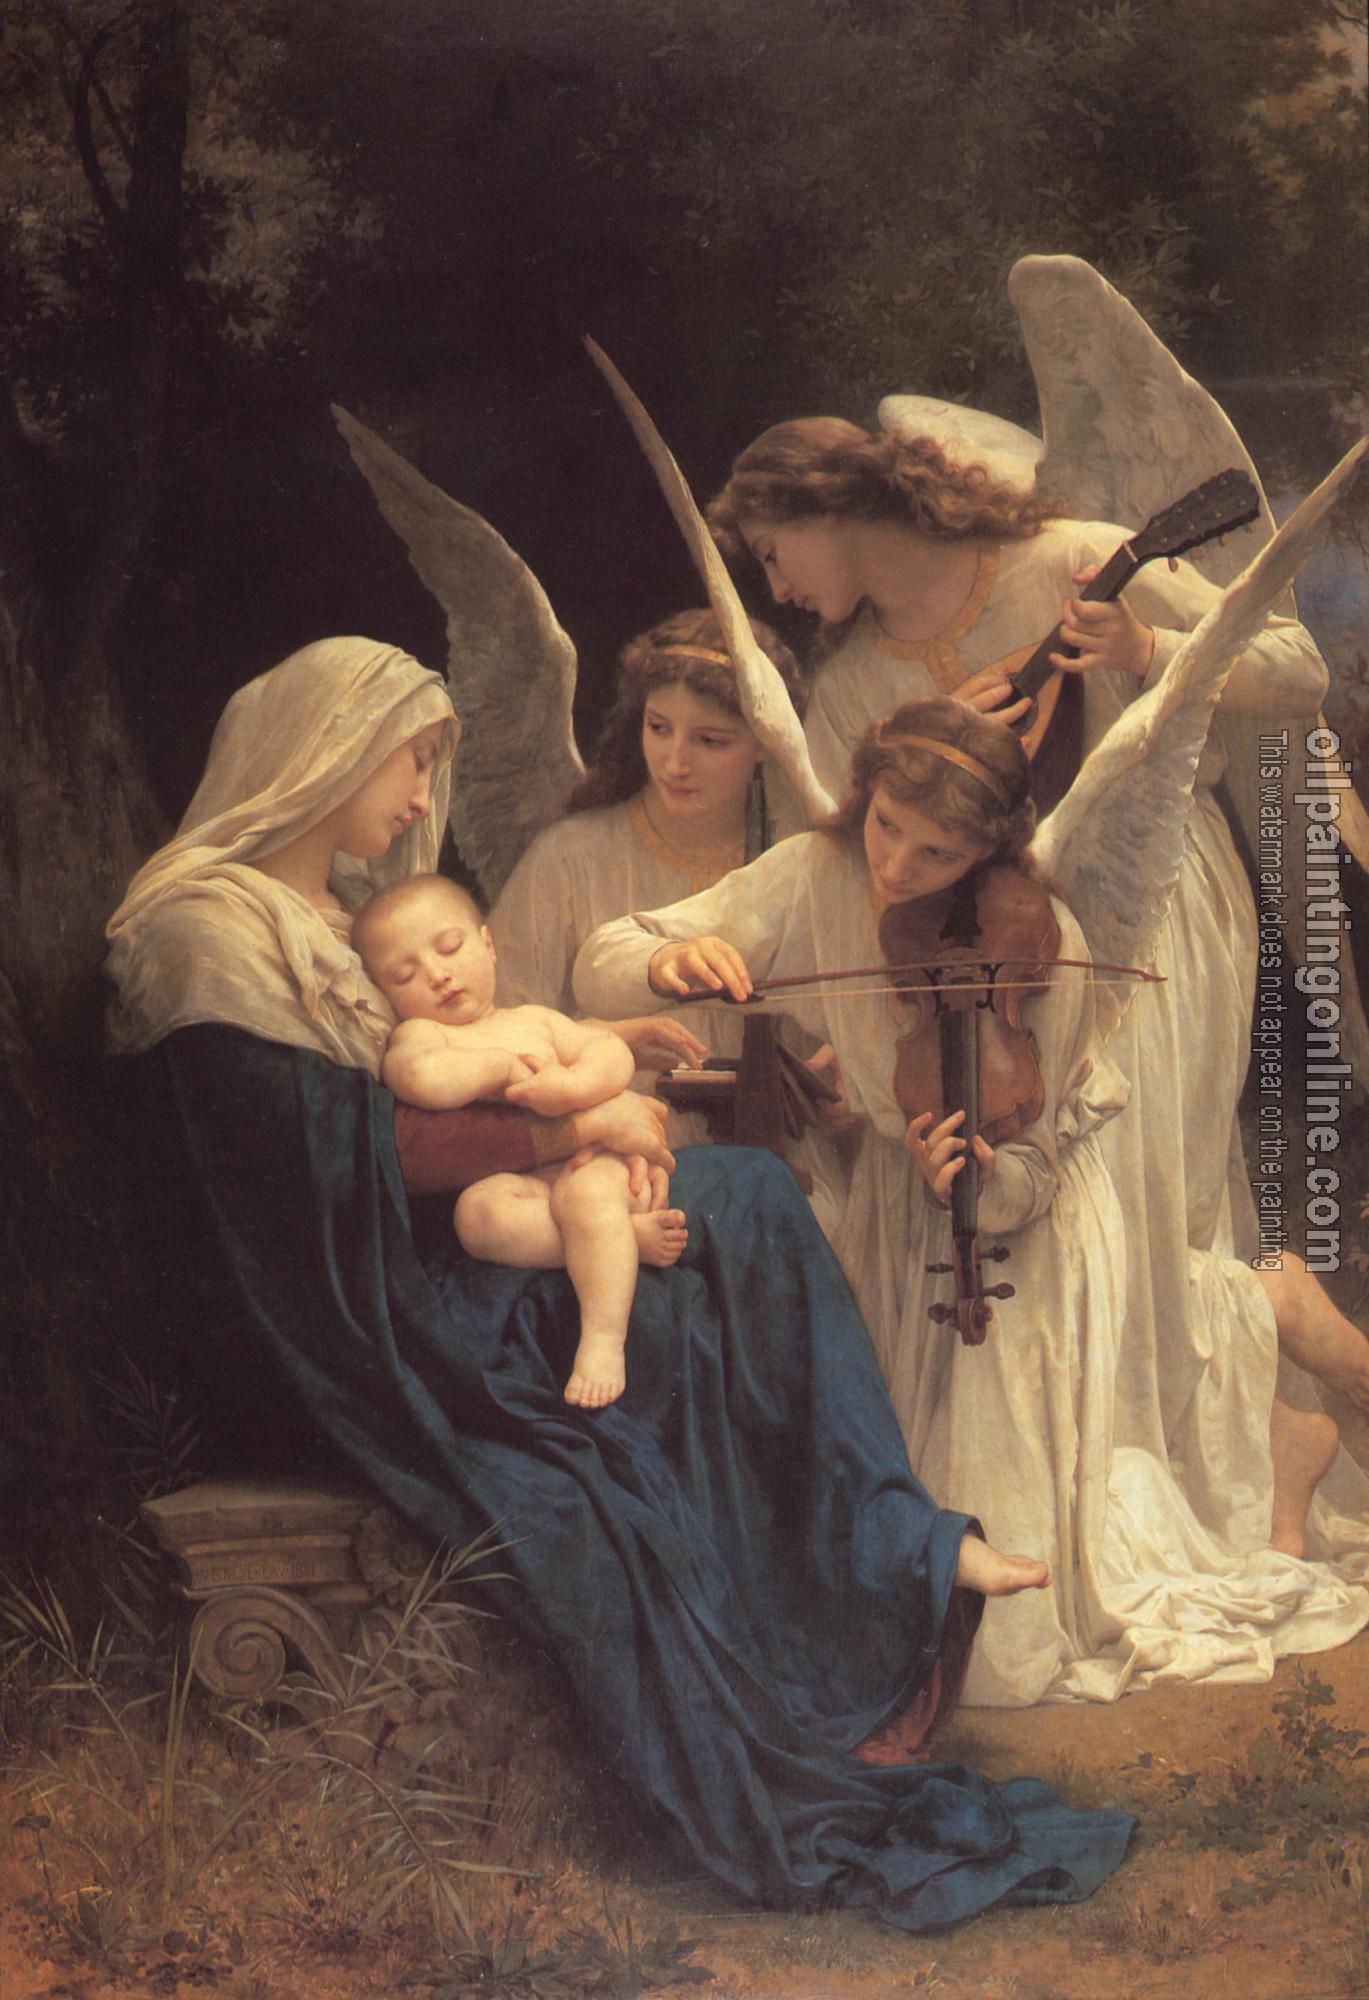 Bouguereau, William-Adolphe - Song of the Angels